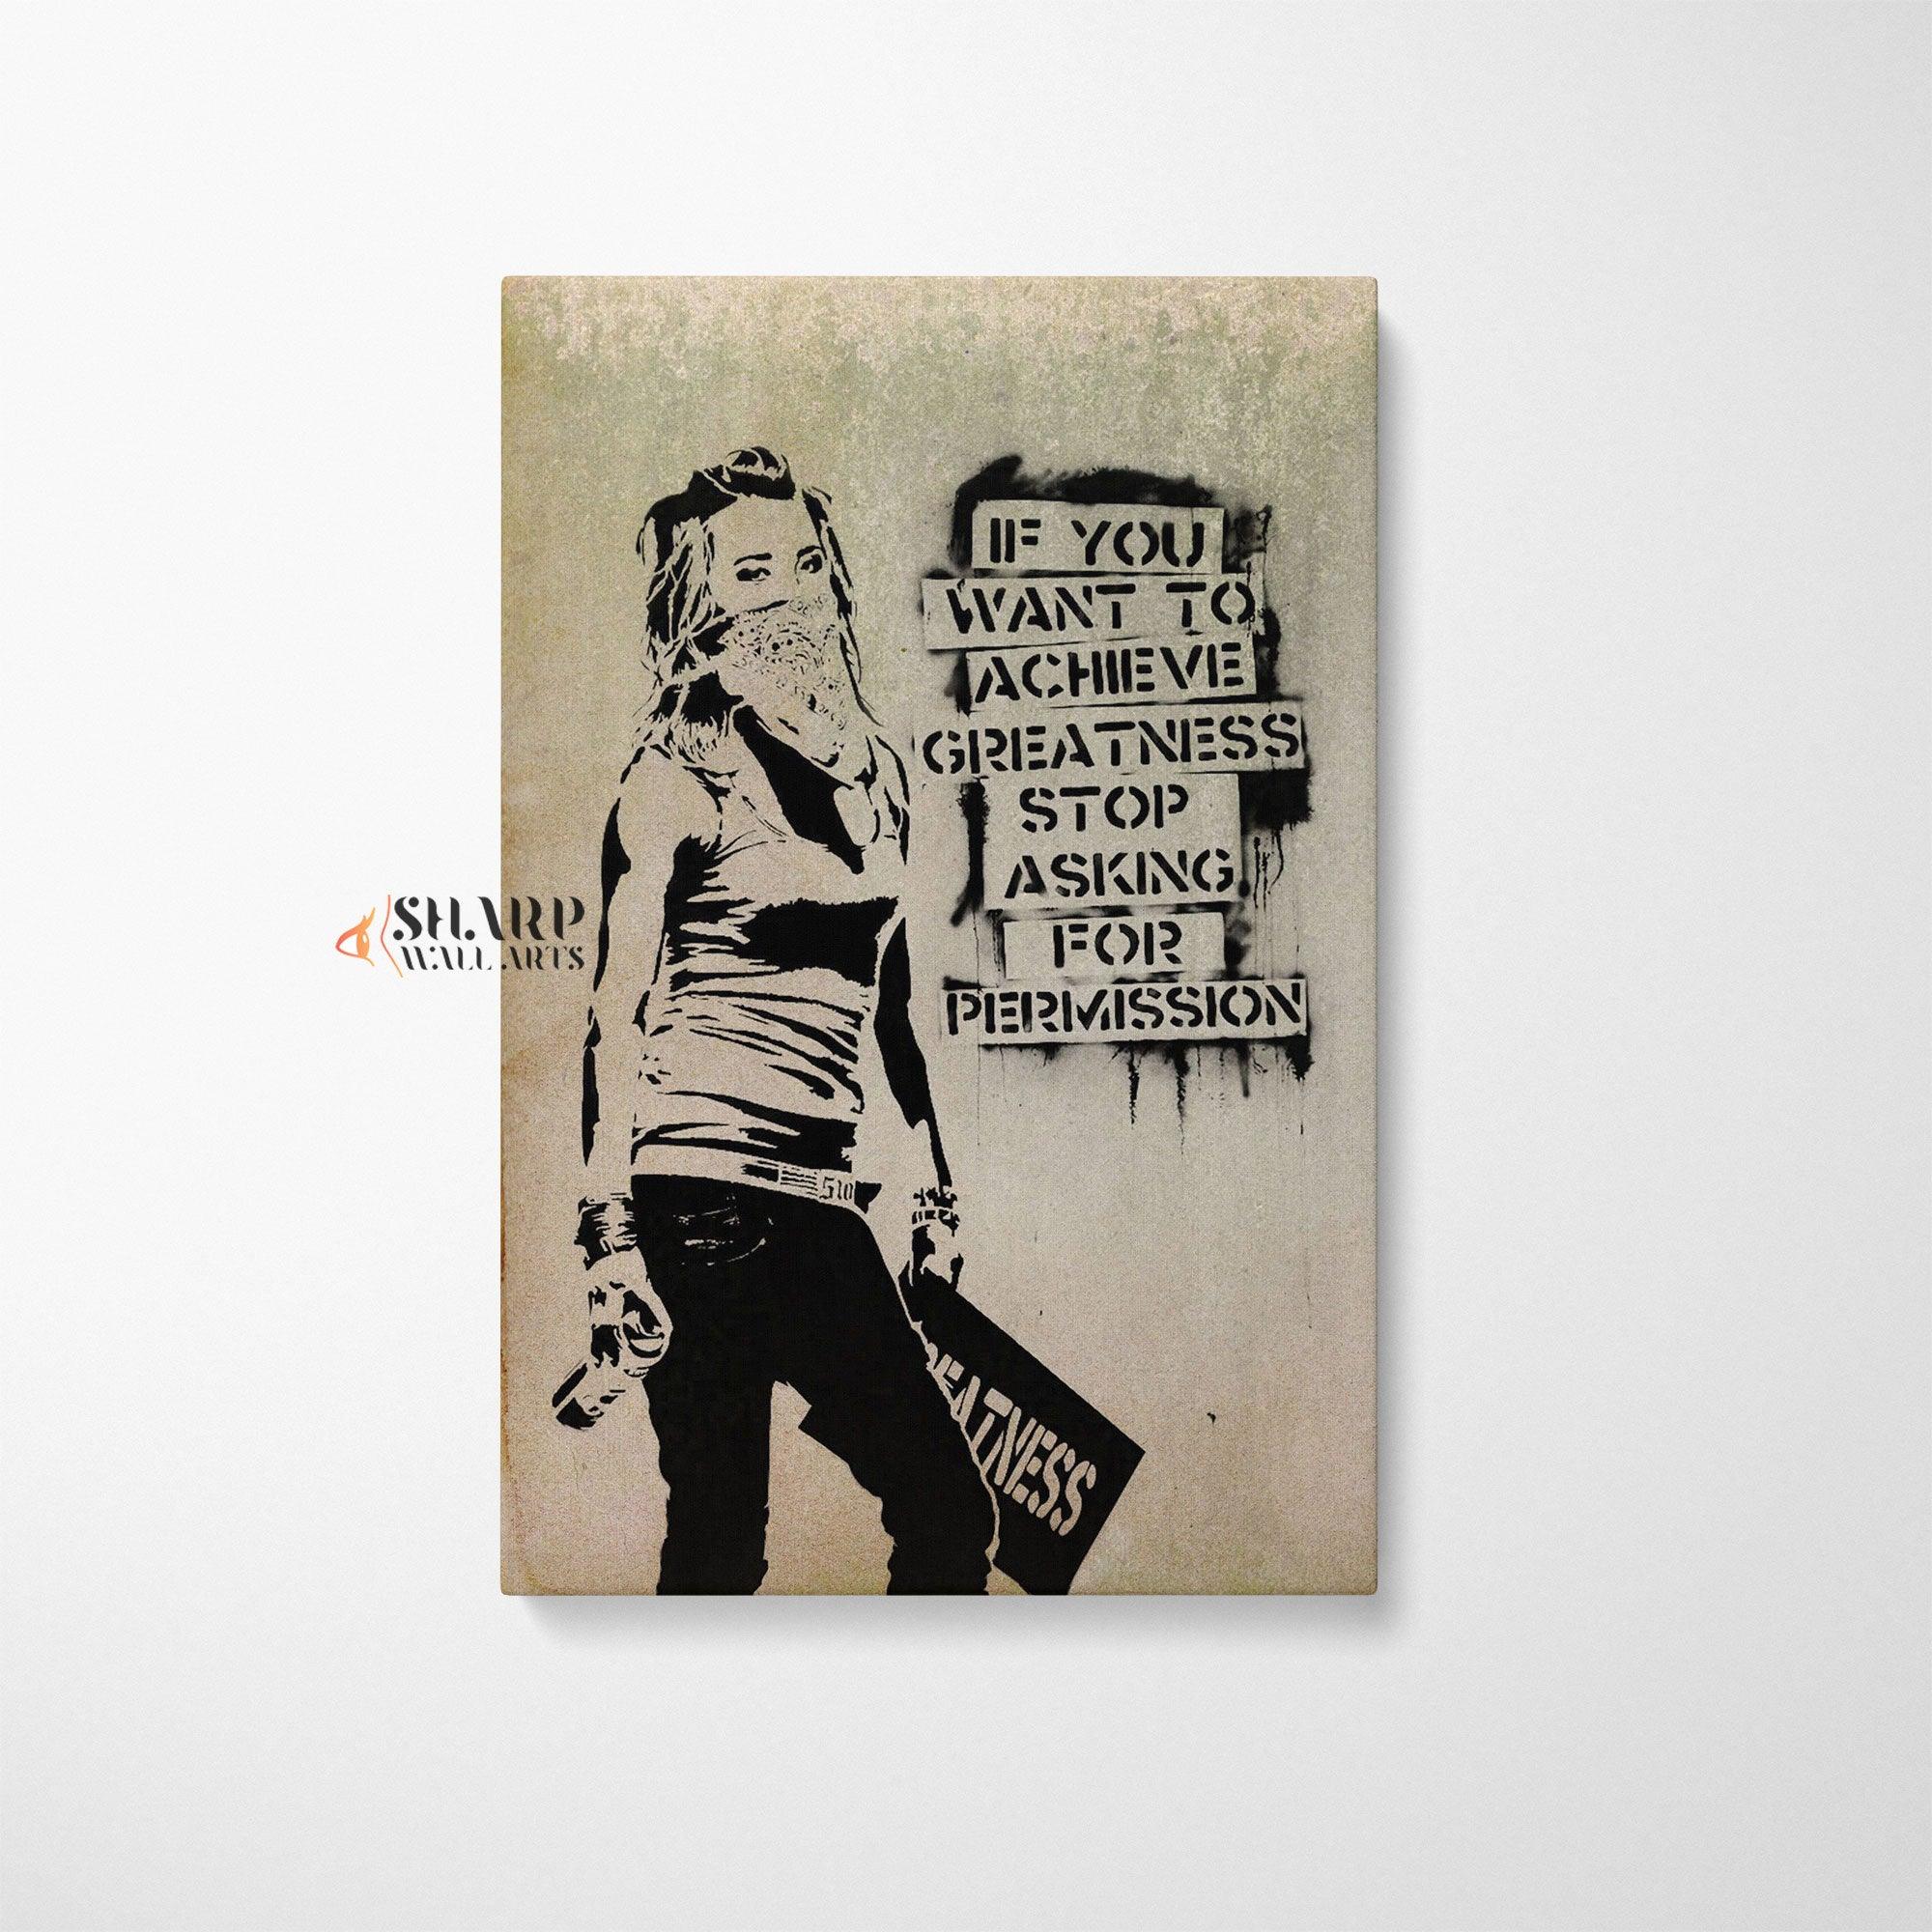 Banksy Wall Art - If you want to achieve greatness stop asking for permission - SharpWallArts